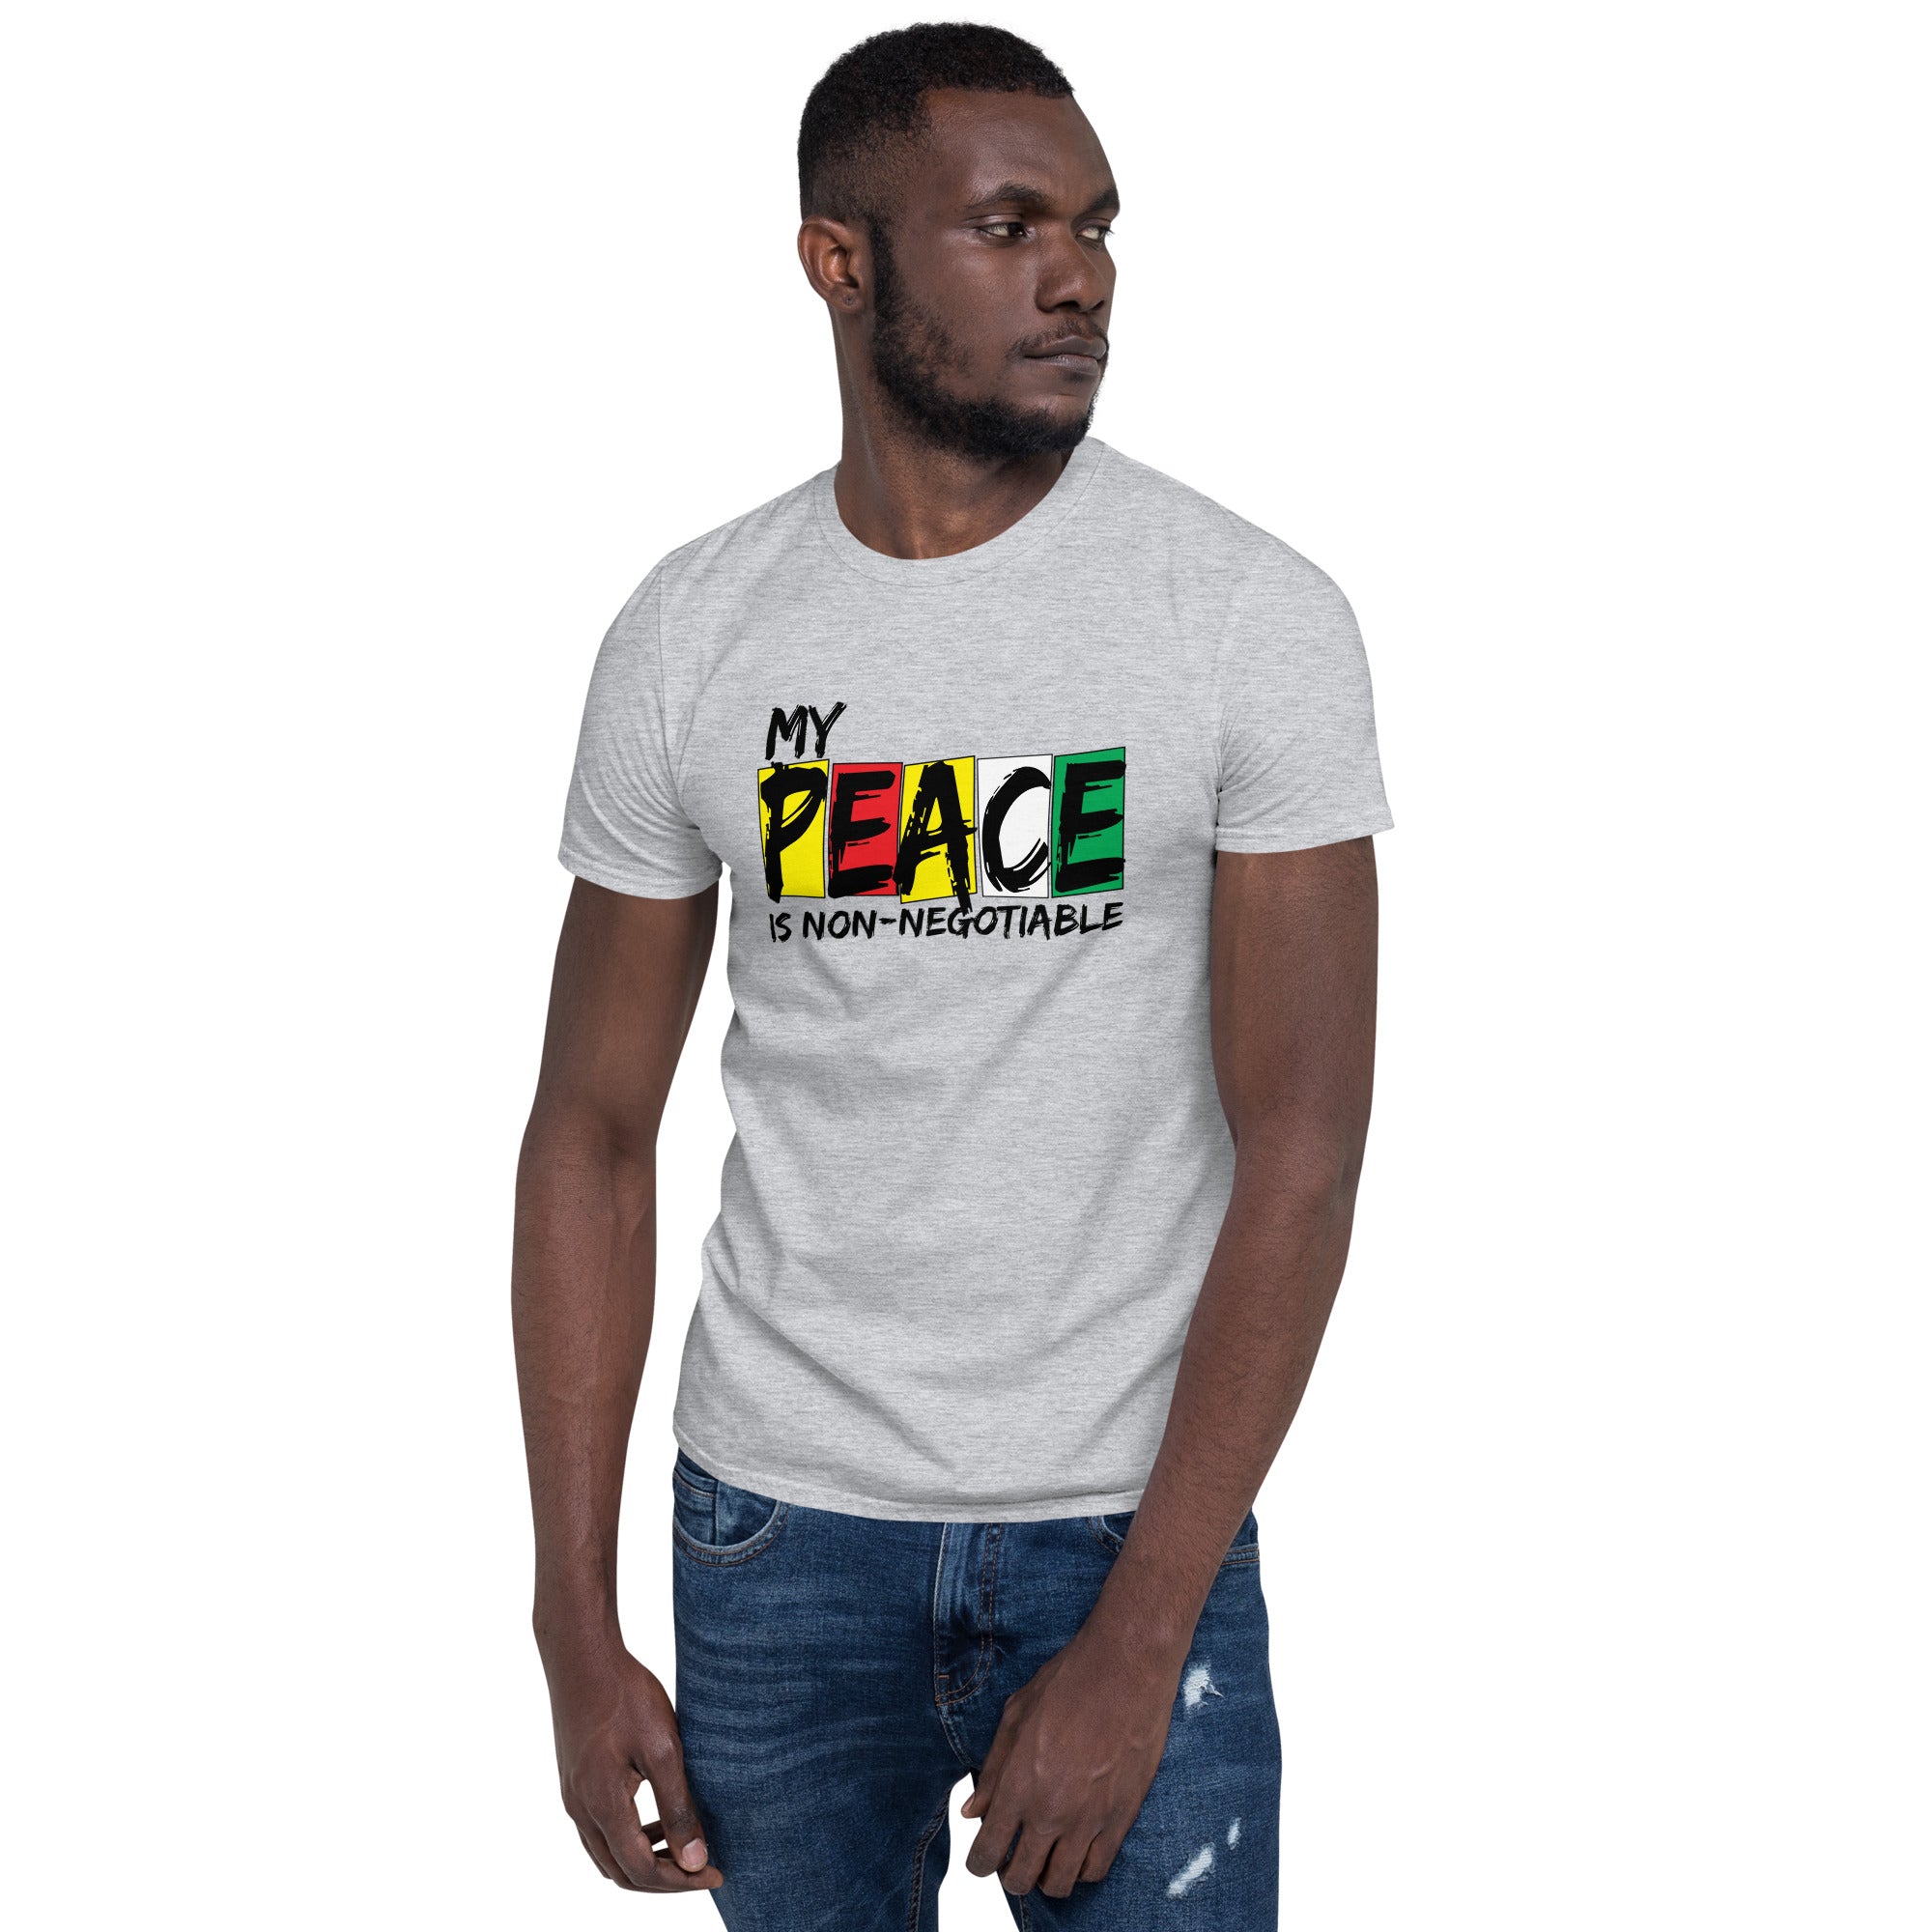 My Peace is Non Negotiable Short-Sleeve Unisex T-Shirt